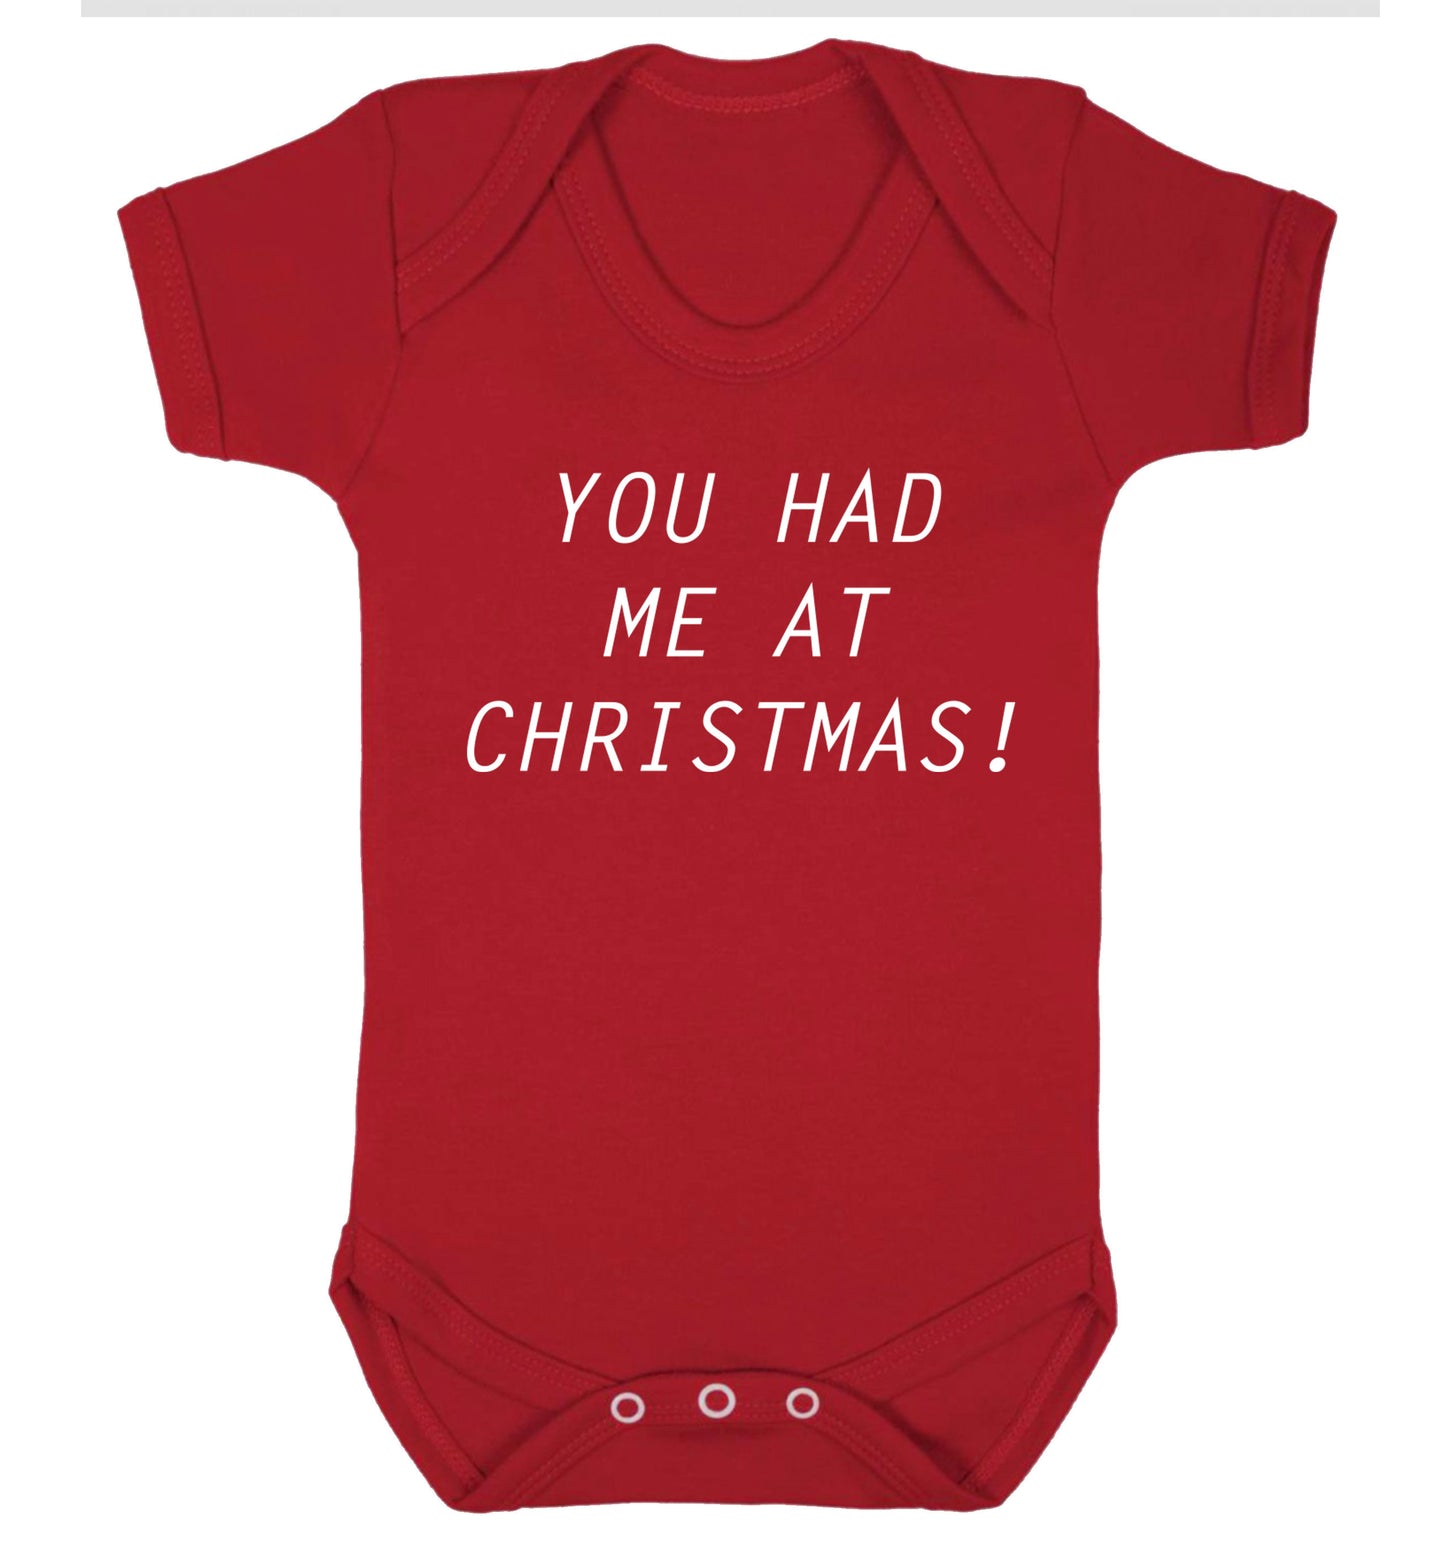 You had me at Christmas Baby Vest red 18-24 months